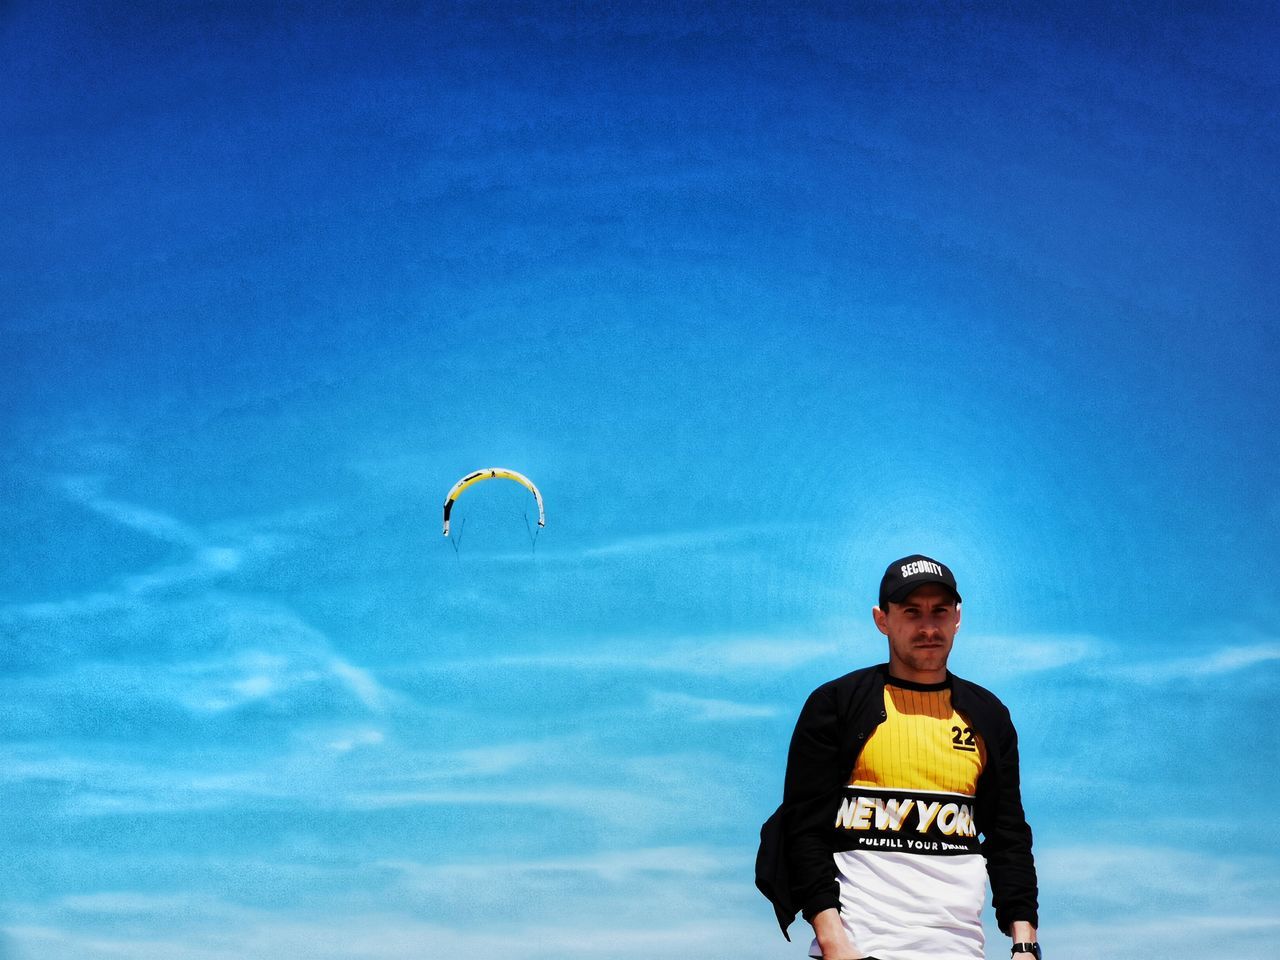 sky, one person, leisure activity, low angle view, sport, blue, front view, cloud - sky, parachute, real people, day, standing, flying, lifestyles, nature, three quarter length, paragliding, extreme sports, glasses